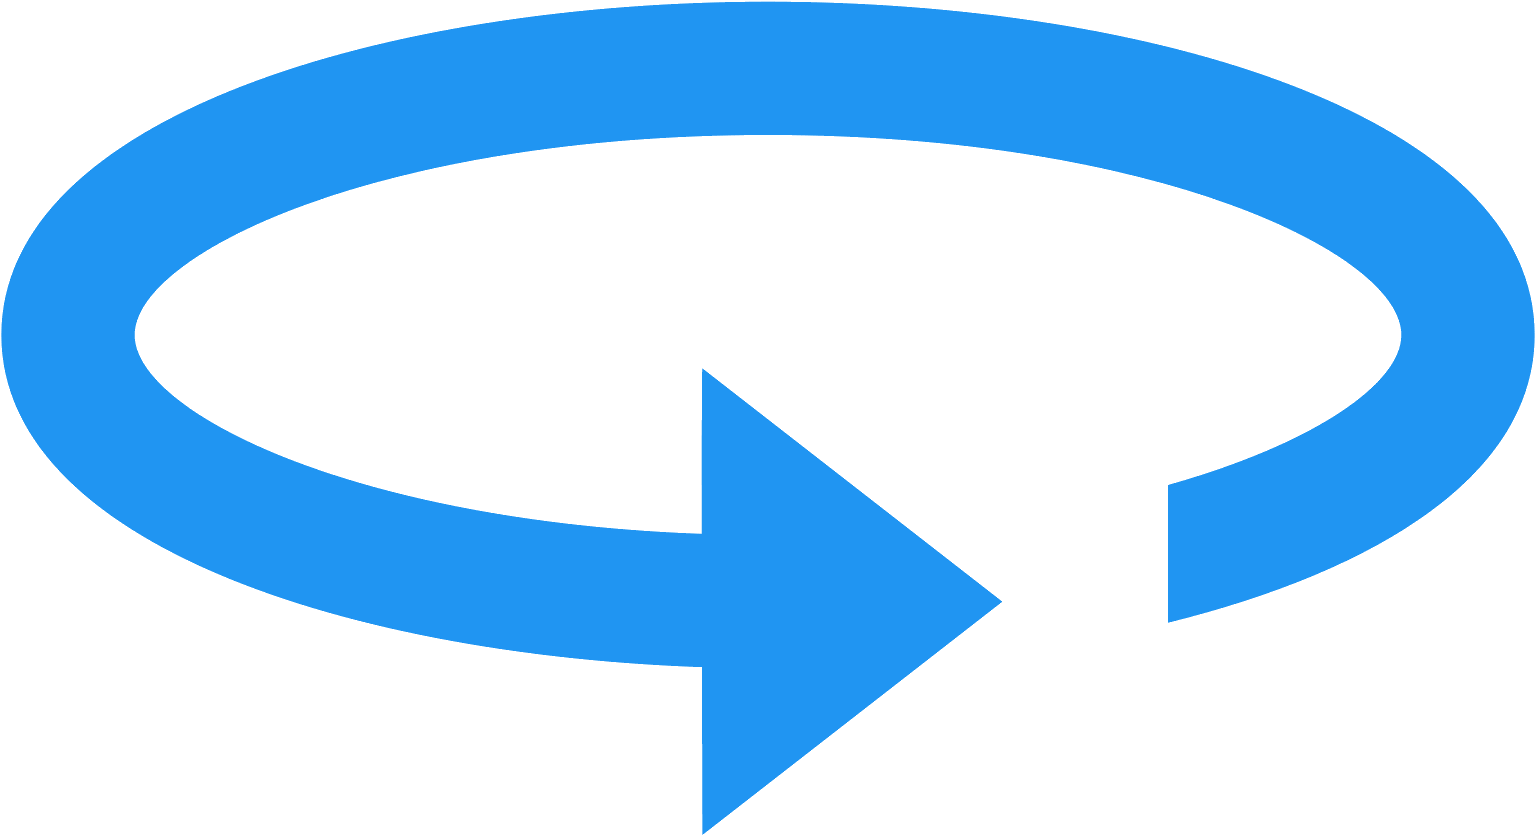 A Blue Arrow Pointing To A Black Background